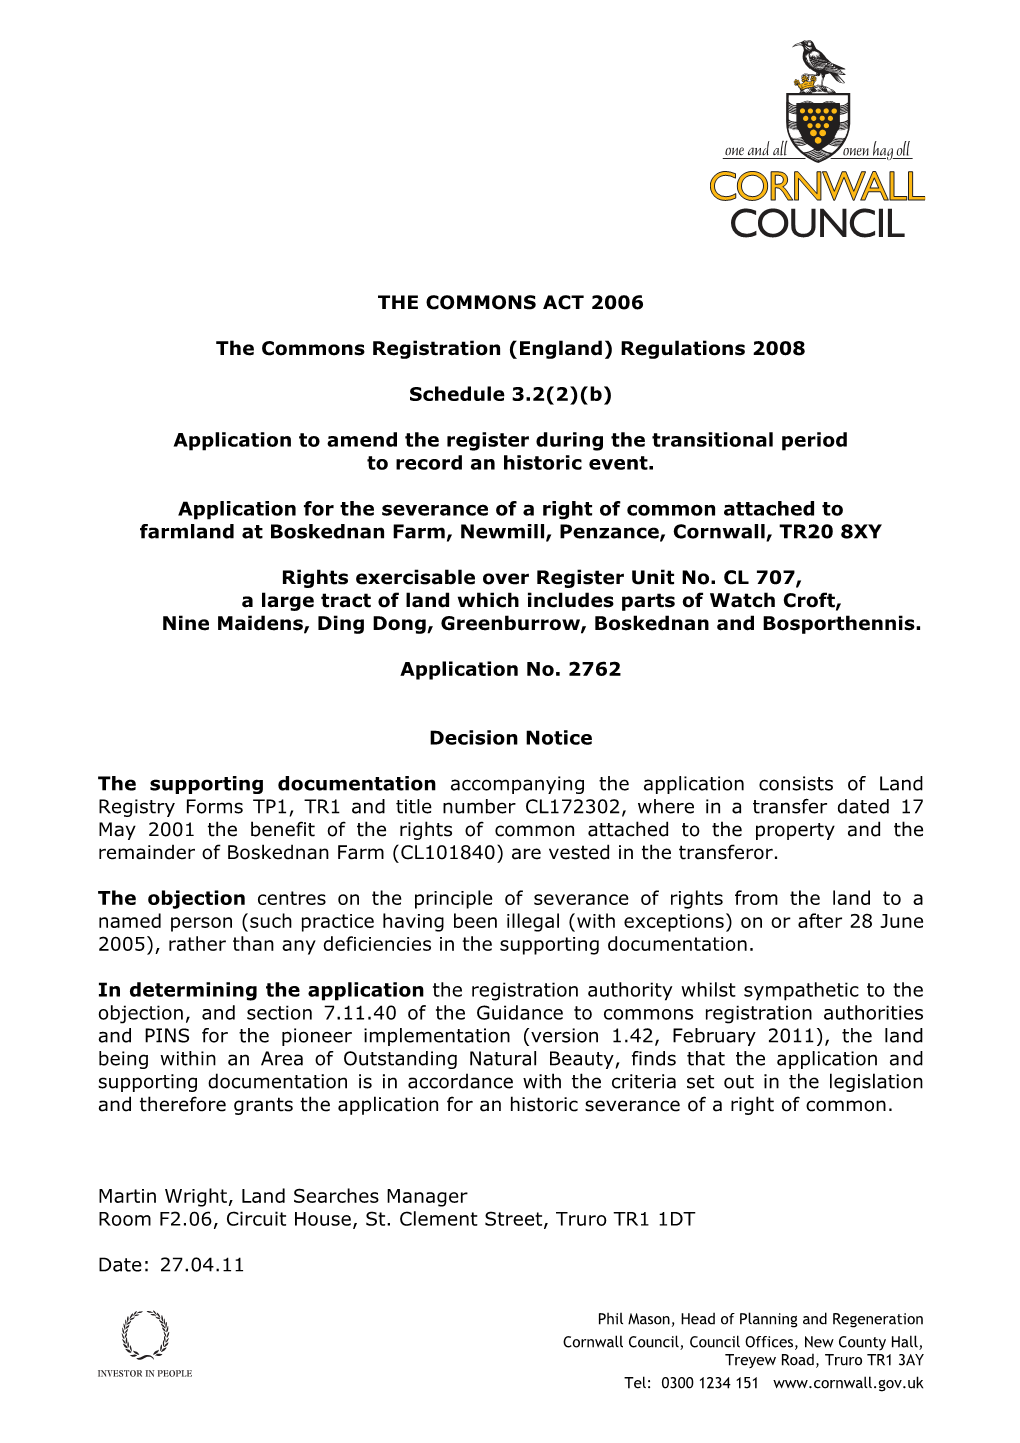 Application 2762, Granted, April 2011. Severance of a Right Attached to Land at Boskednan Farm, Newmill